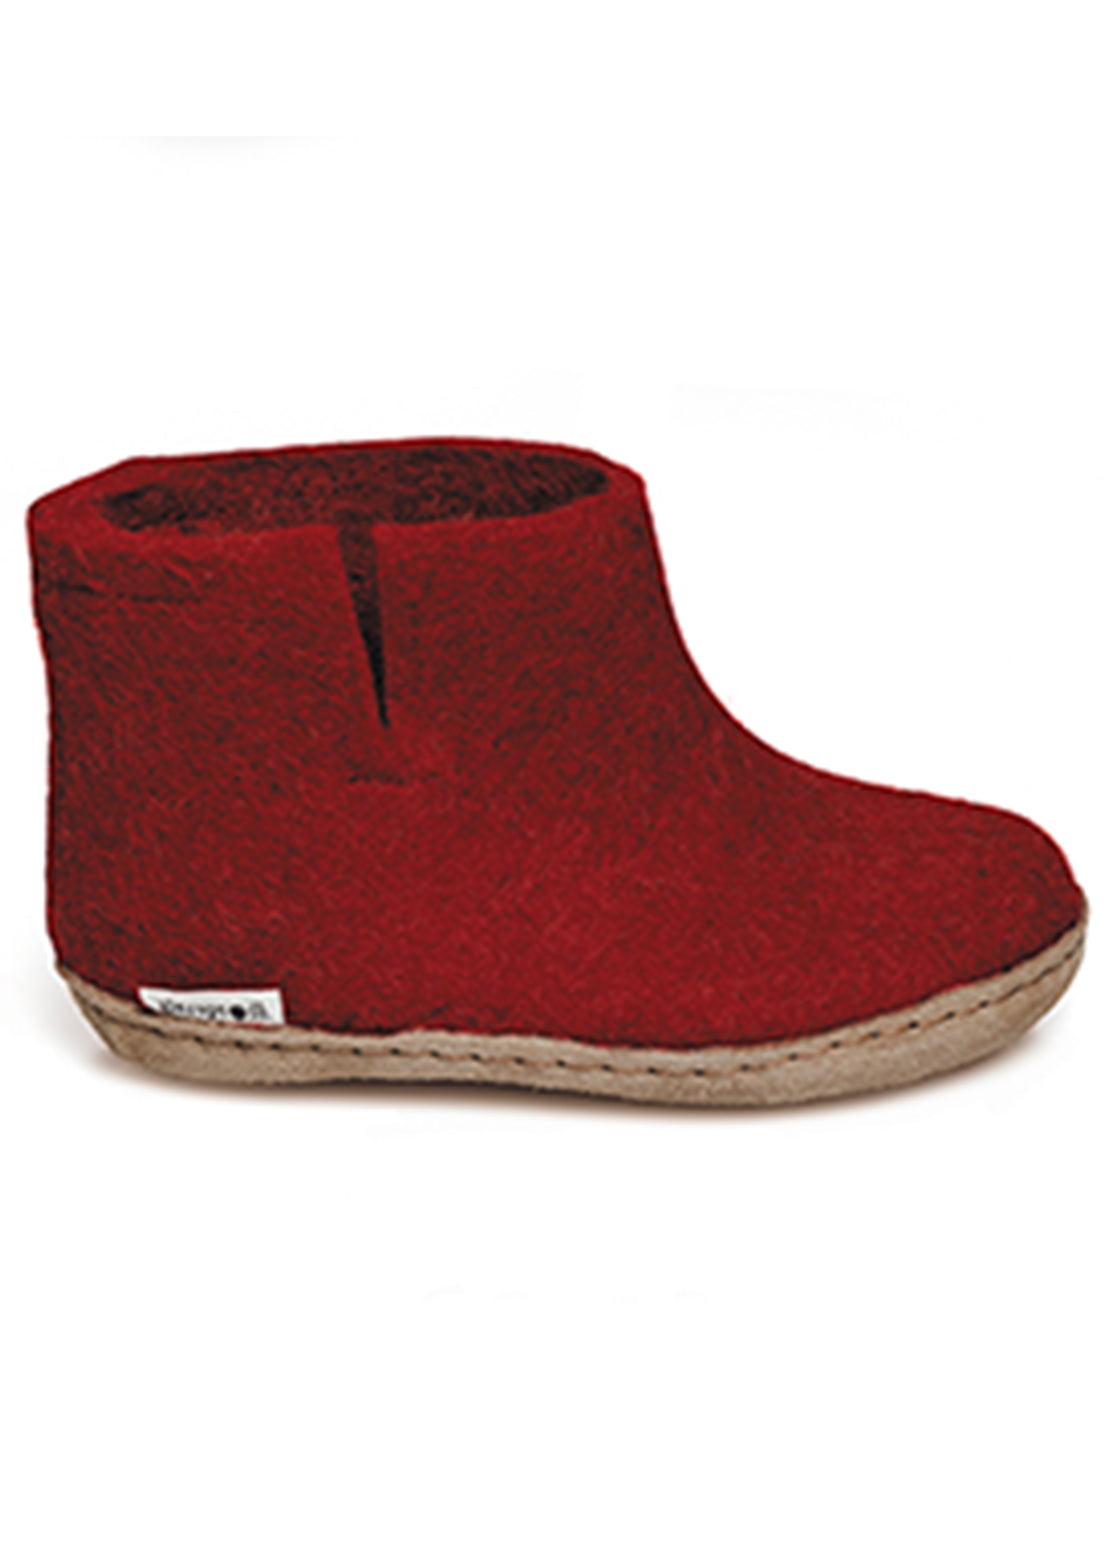 Glerups Junior Leather Sole Slipper Boots Red